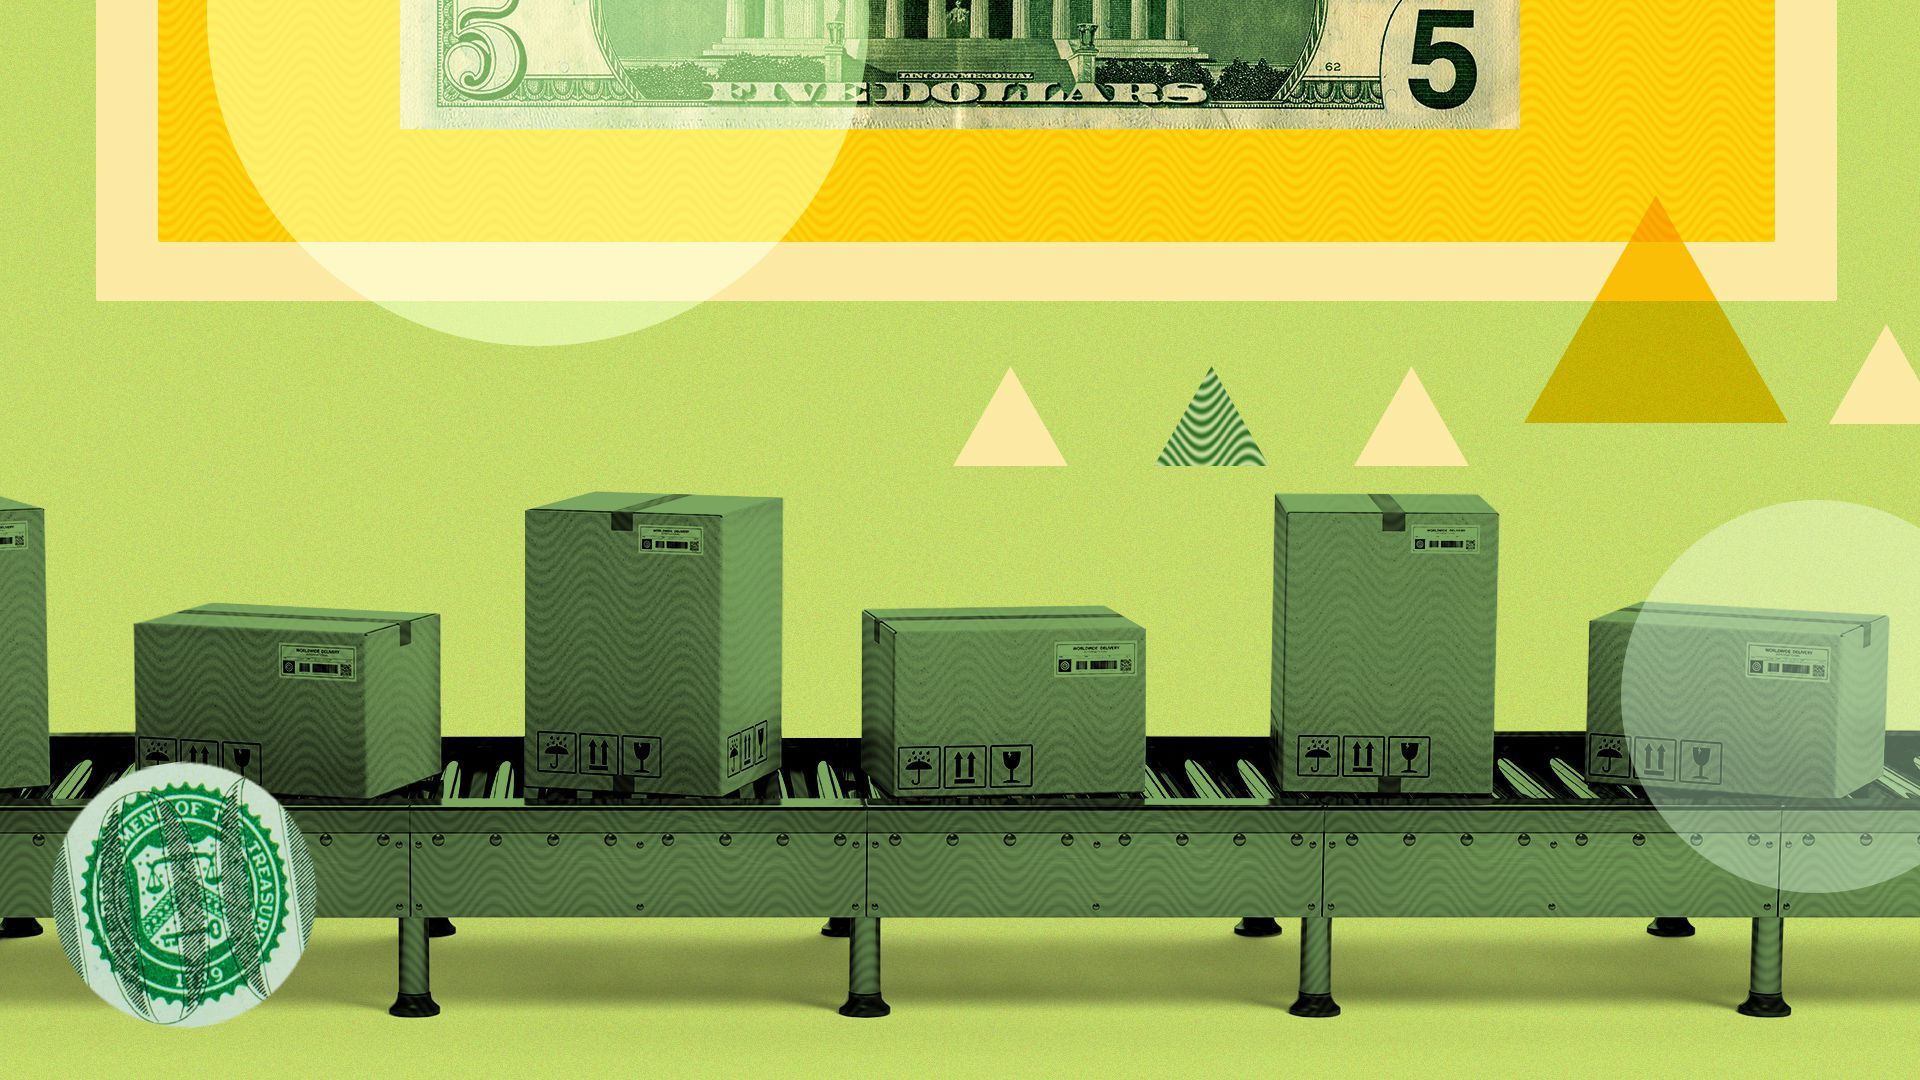 Illustration of a conveyor belt with packages surrounded by shapes and dollar elements.